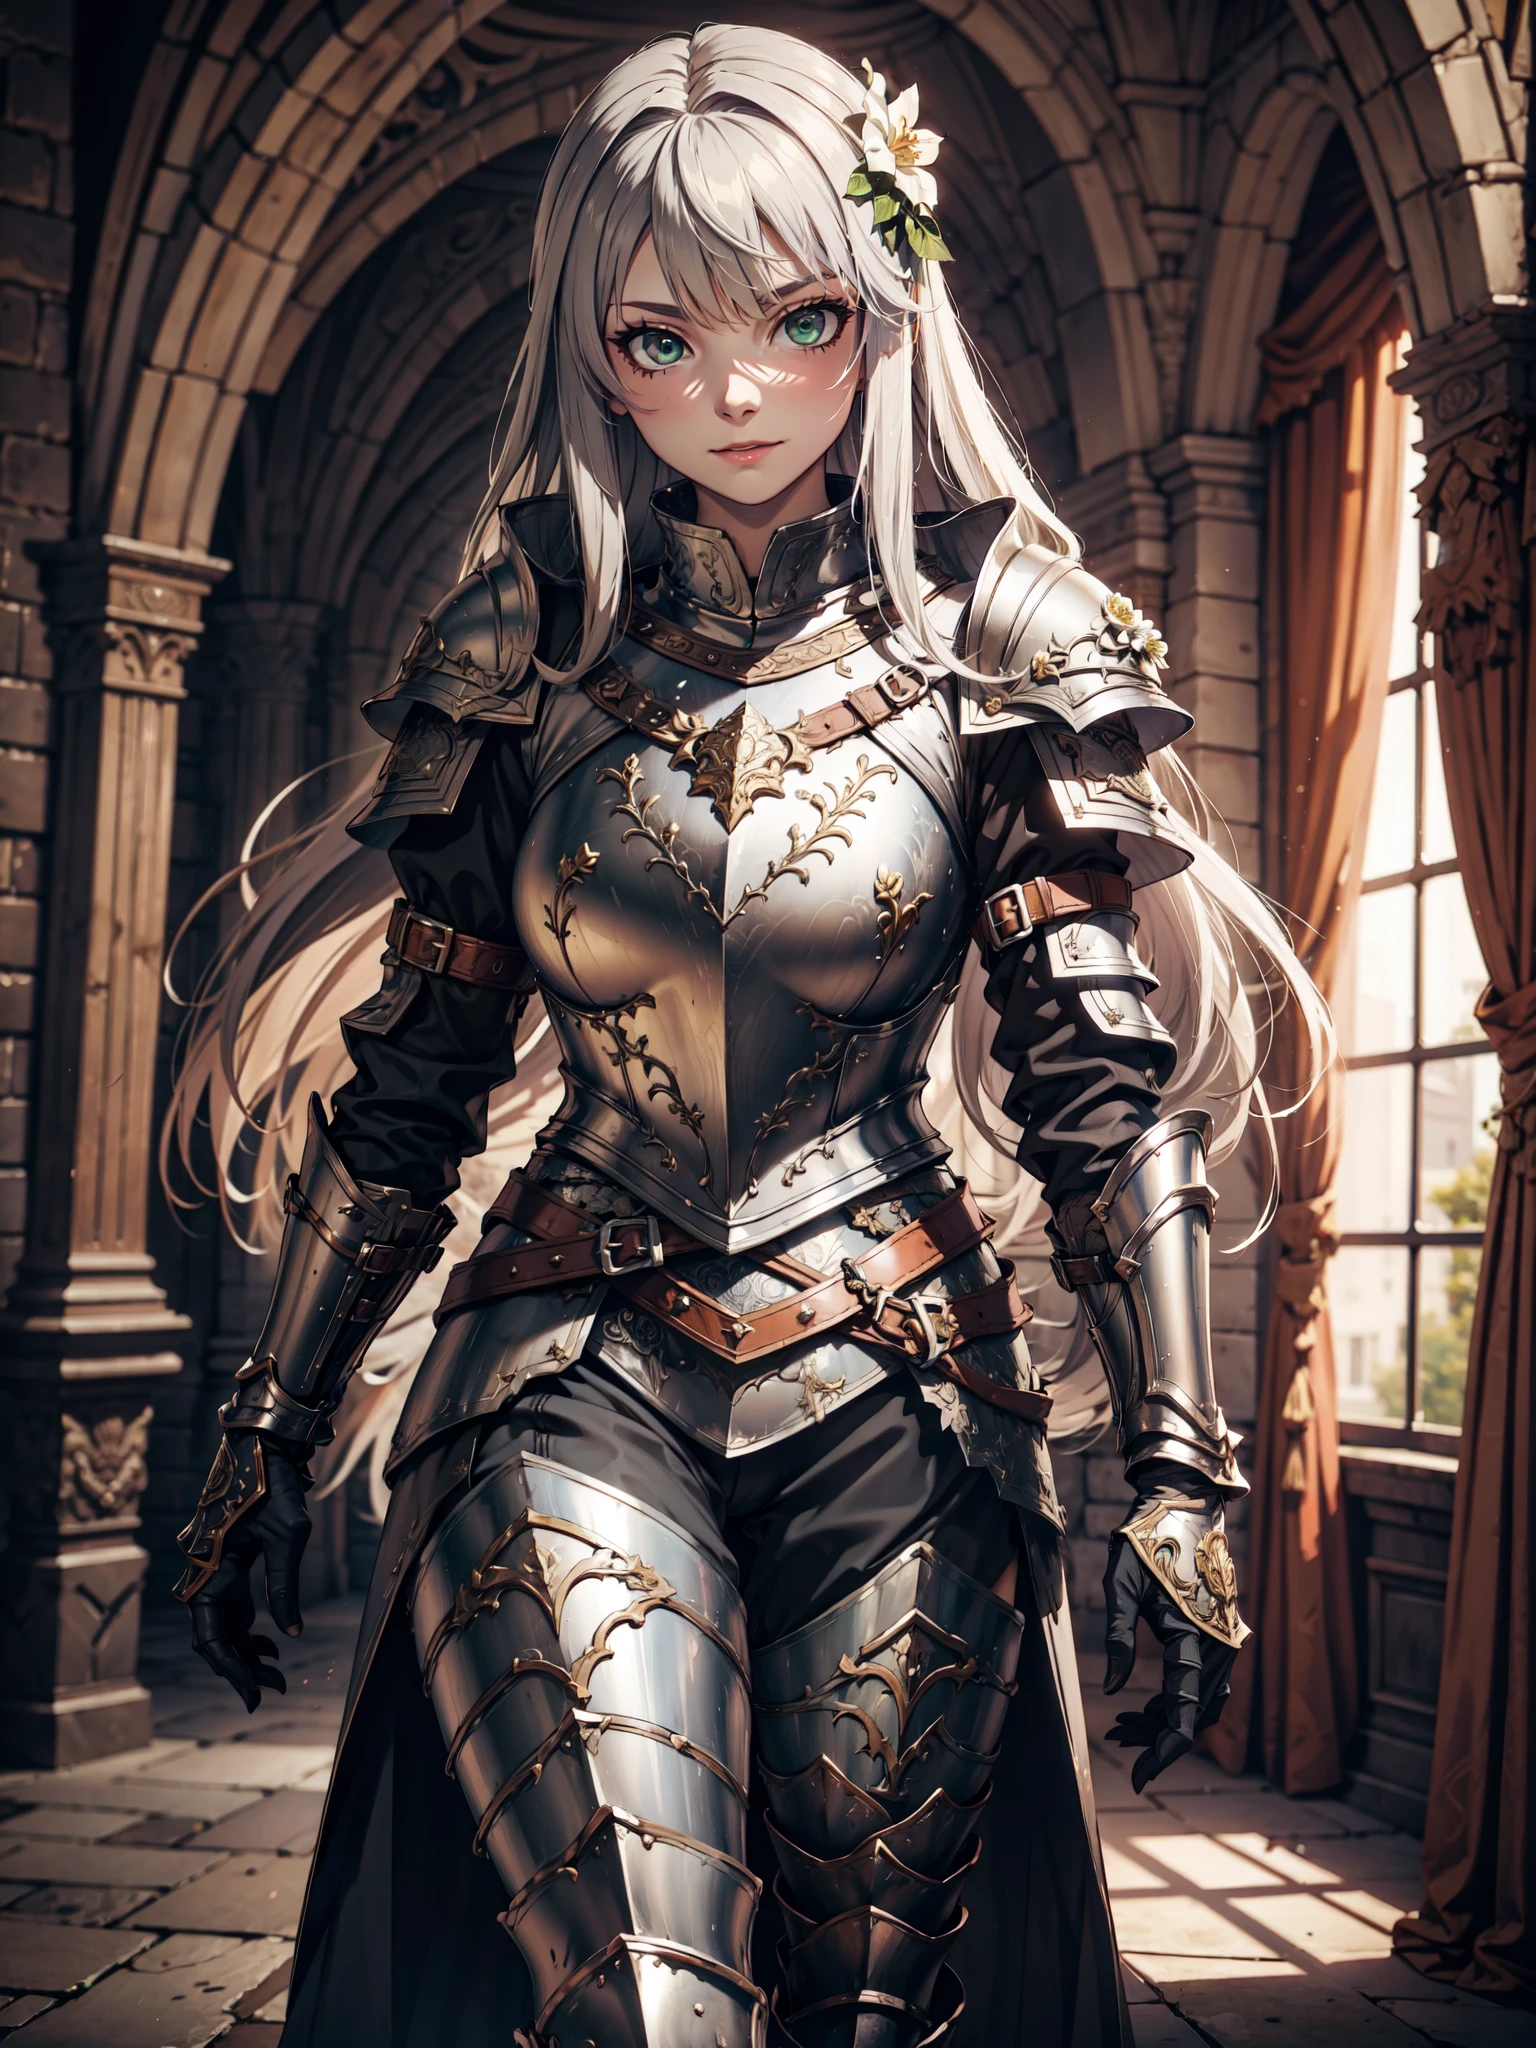 Ultra High Definition, Ultra High Quality, Hyper Definition, Hyper Quality, Hyper Detailed, Extremely Detailed, Perfectly Detailed, 8k, 1 Anime Female, Full Body, ((Long Silver Hair)), Noble Armor, ((Leg Armor, Armored Pants, Symmetric, Armored Boots)), Gloves, Solid Green Eyes, Cheerful Expression, White Flower Barrette, Armored With Full Coverage Noble Plate Armor, Leg Armor, Mansion Room Panoramic Background